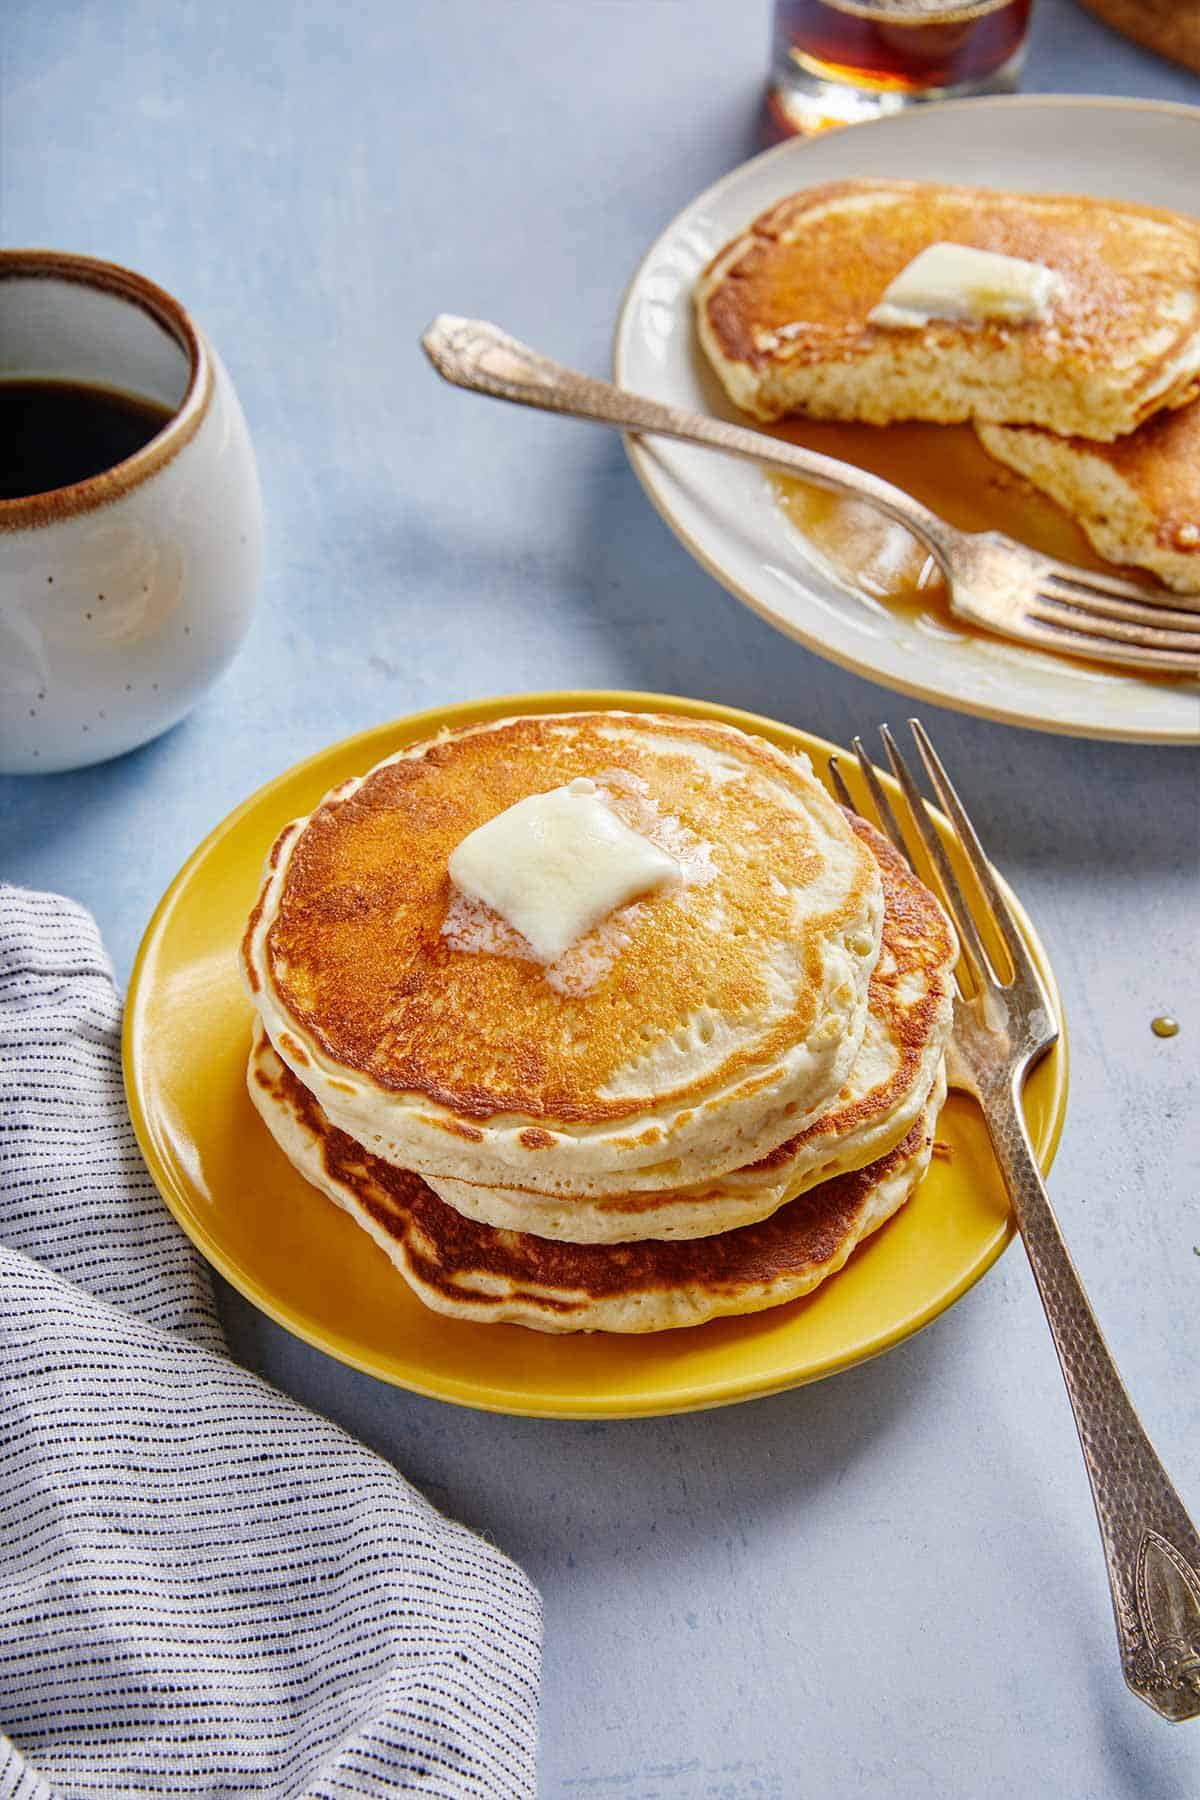 An overhead photo of a stack of classic pancakes with a melting pat of butter on top and a plate in the background partially eaten.